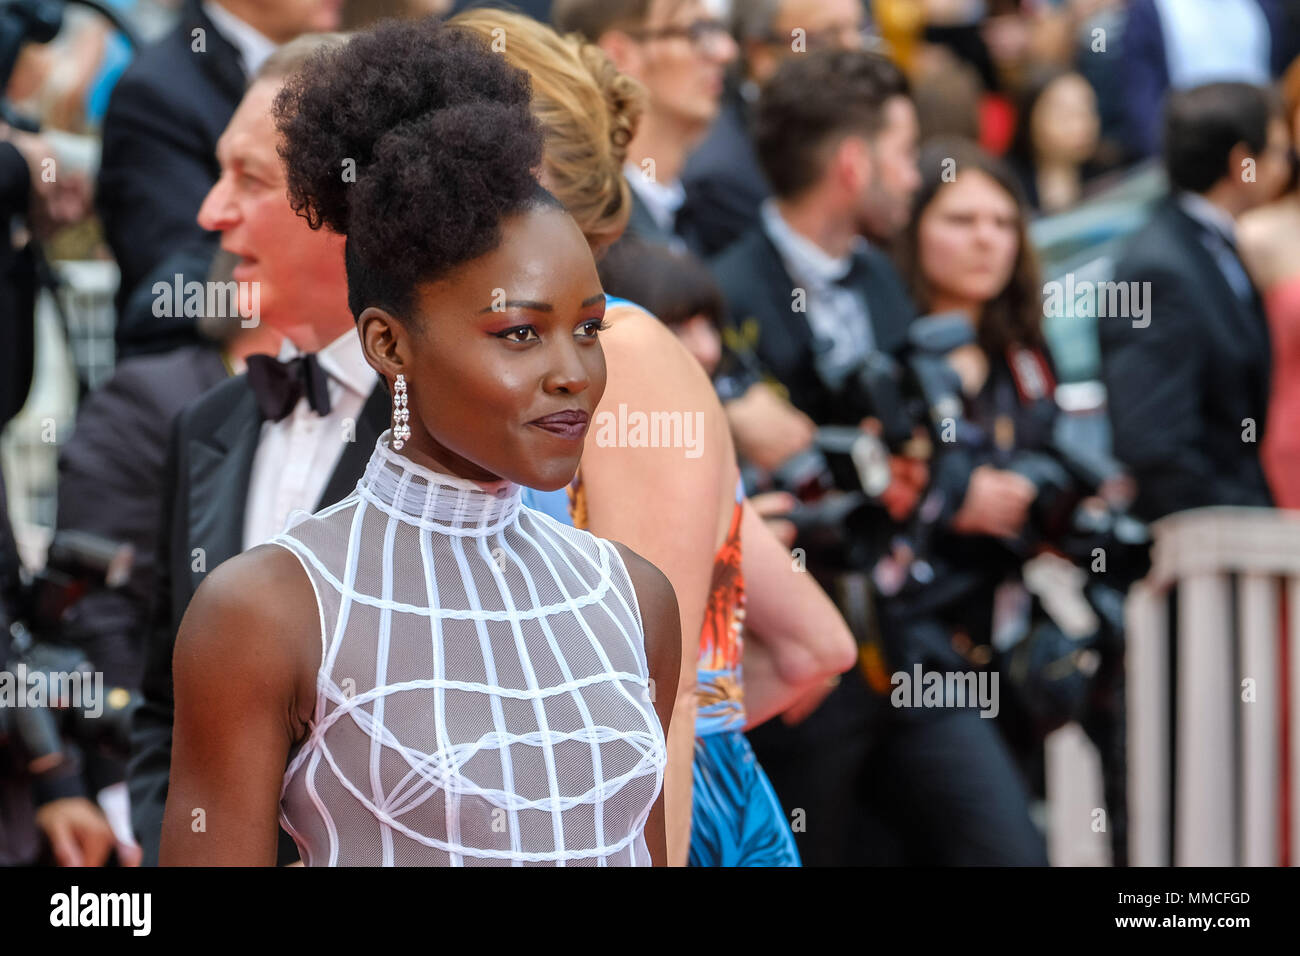 Cannes, France. 10th May, 2018. Lupita Nyong'o at the Sorry Angel Red Carpet Event on Thursday 10 May 2018 as part of the 71st International Cannes Film Festival held at Palais des Festivals, Cannes. The French title of the film is Plaire, aimer et courir vite . Pictured: Lupita Nyong'o. Picture by Credit: Julie Edwards/Alamy Live News Stock Photo